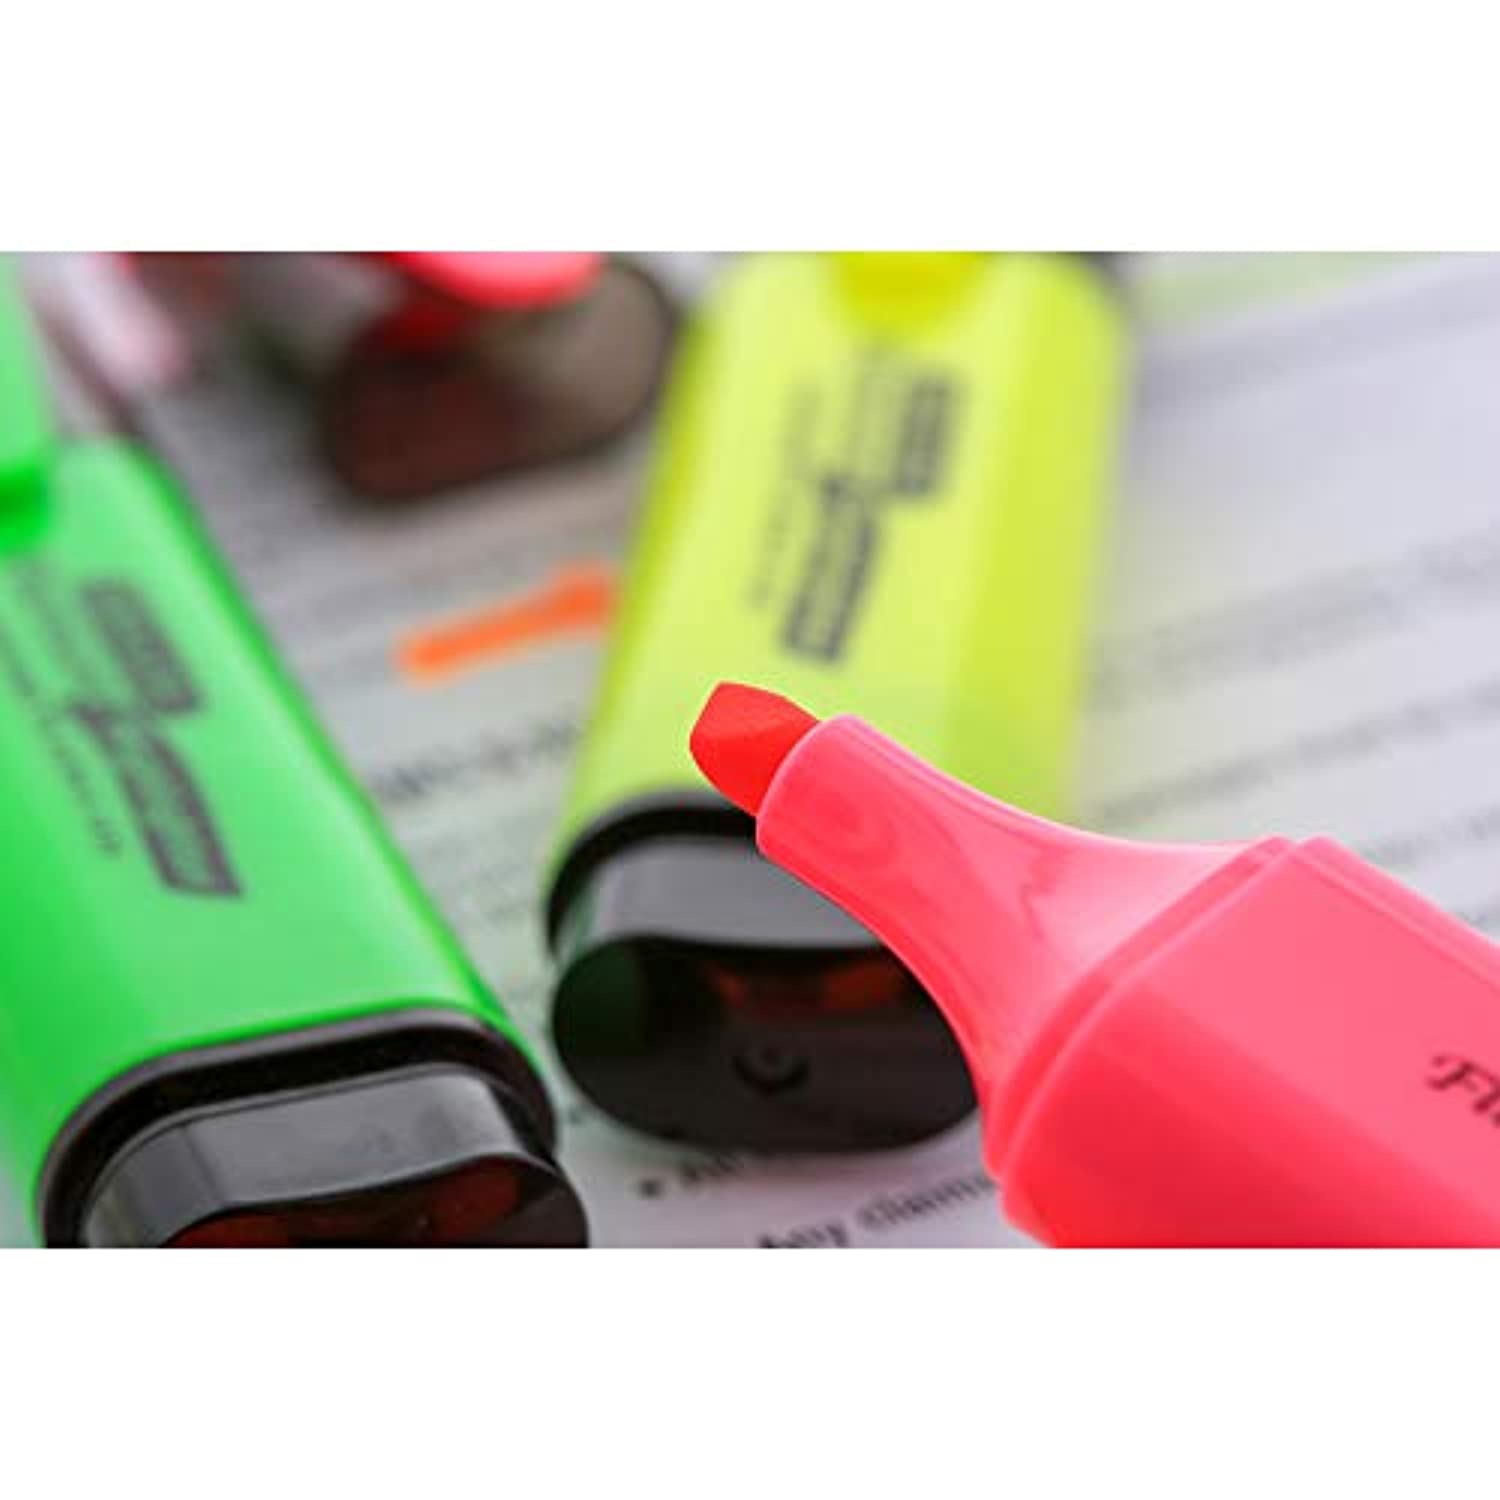 Neon Highlighters w/Pocket Clip, Chisel Tip Broad Fine Line, Unscented Quick Dry (3/Pack)